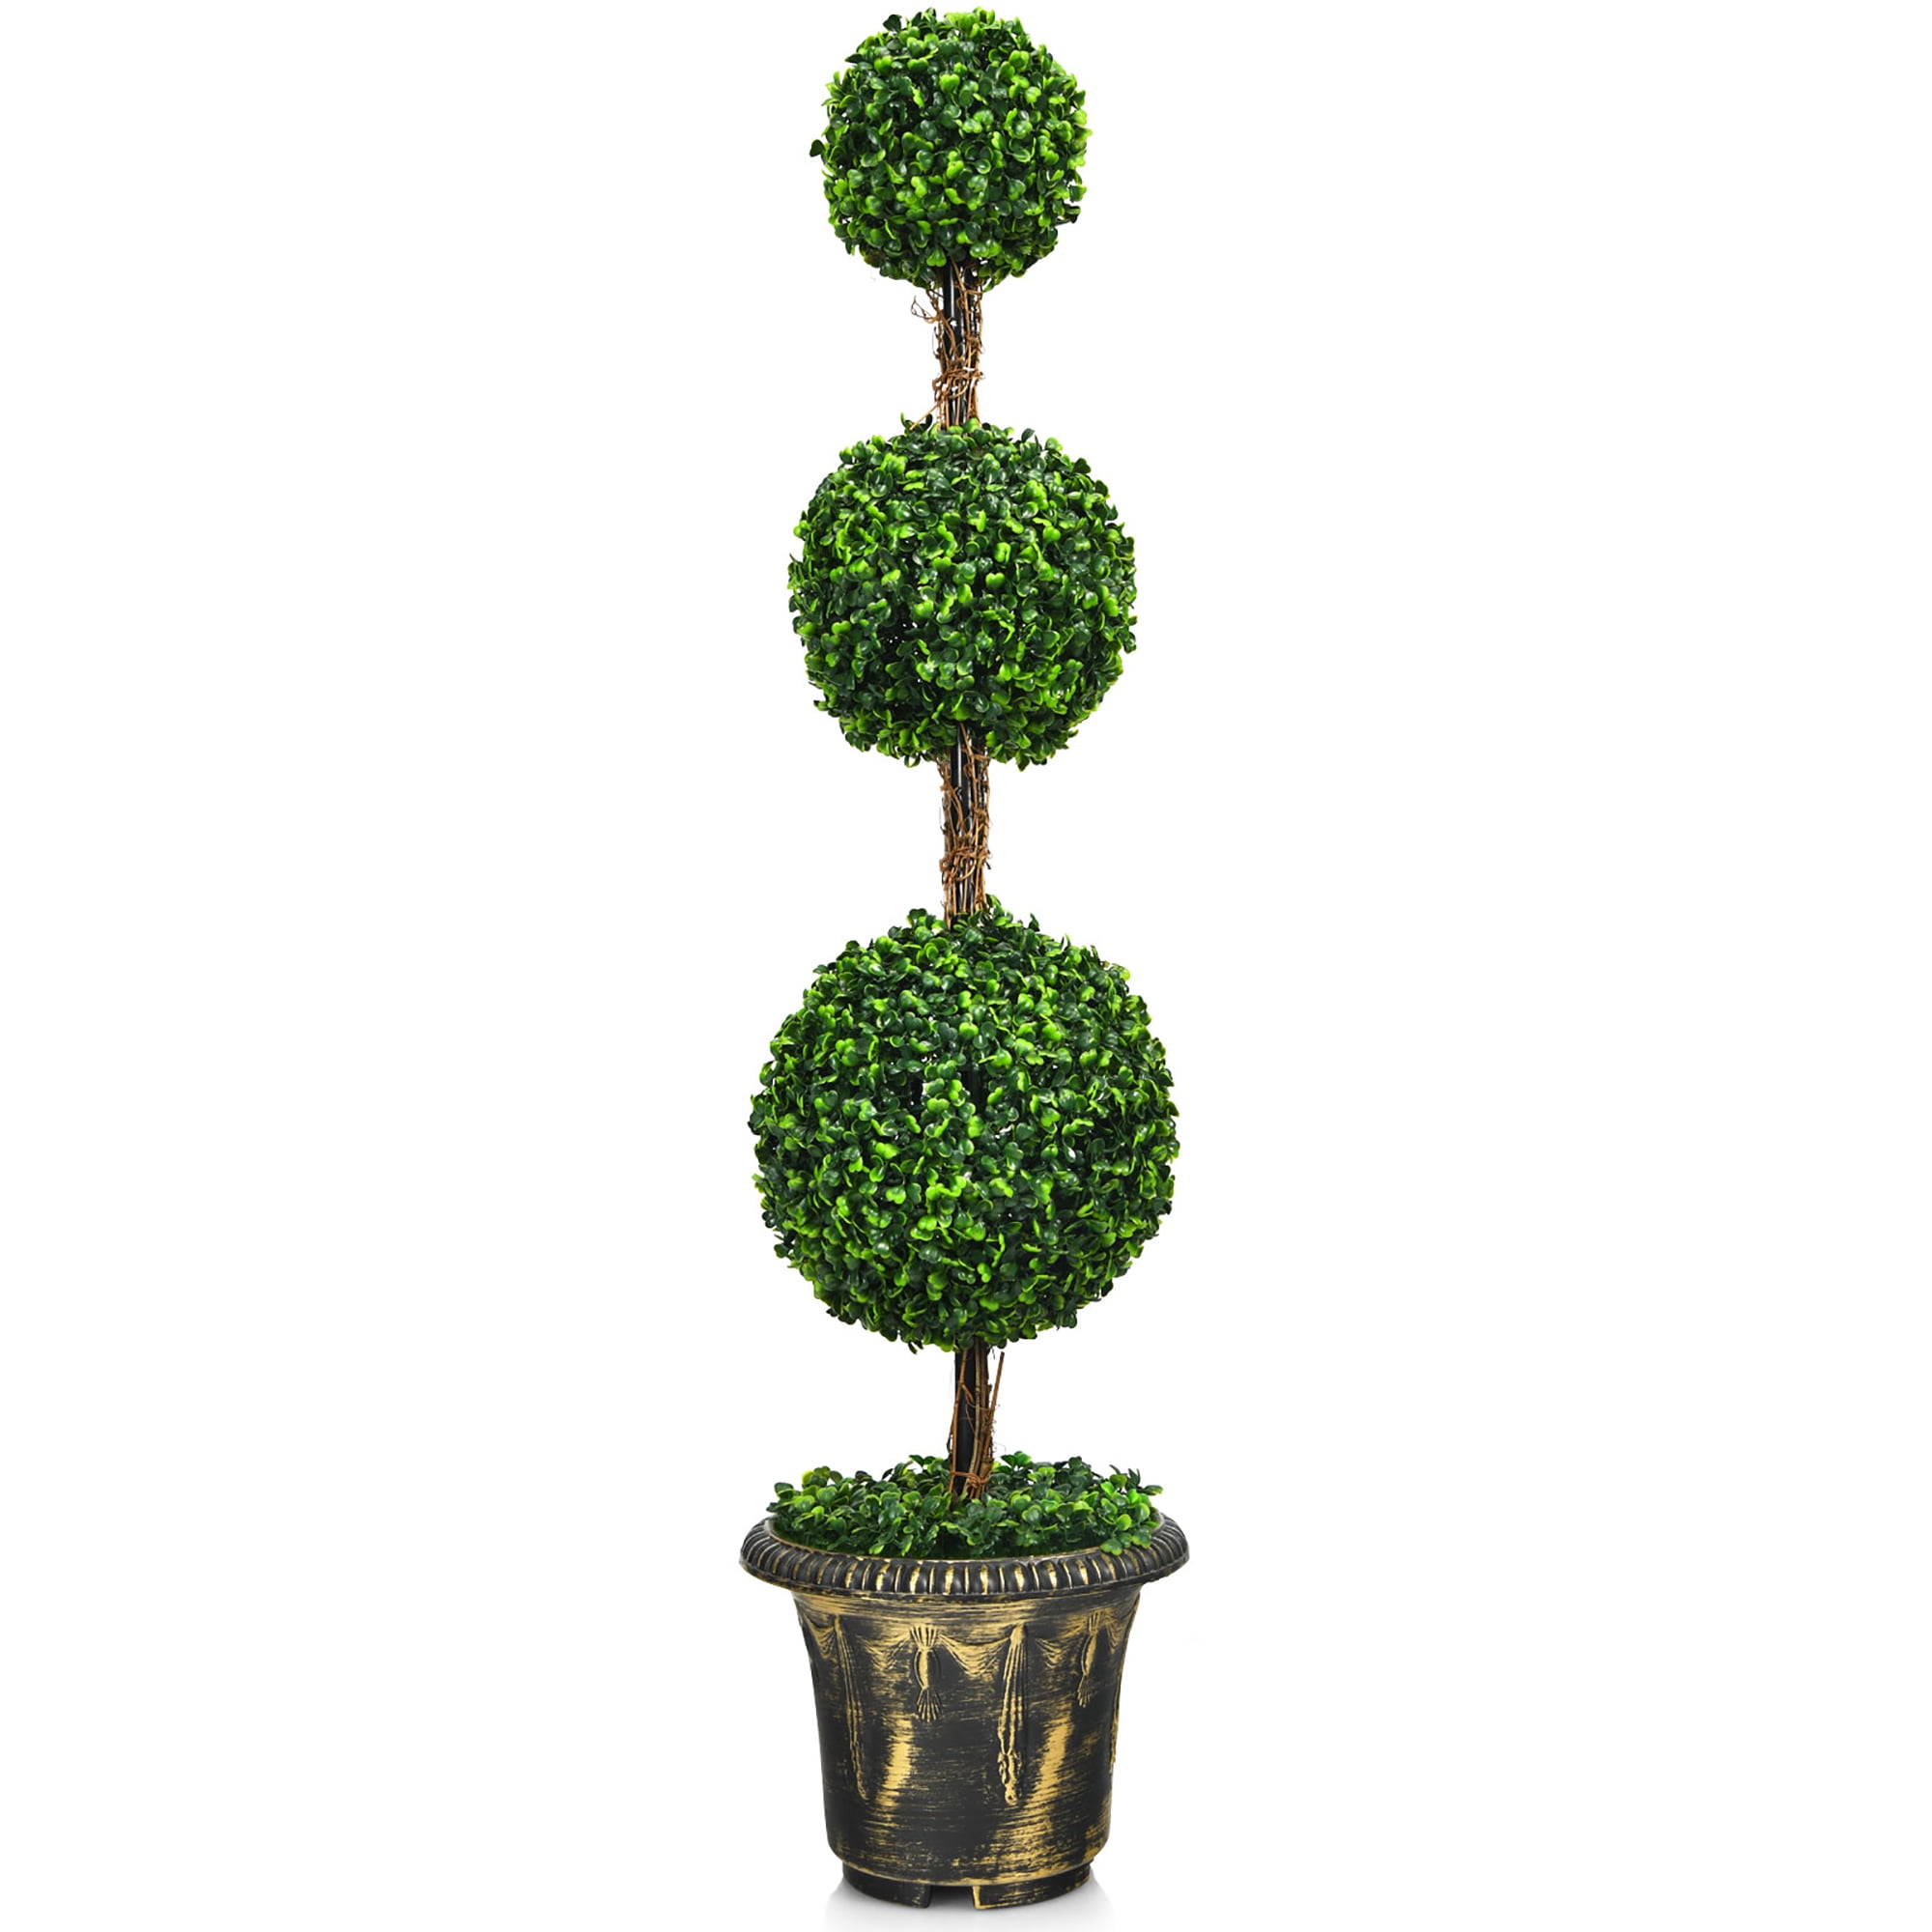 Details about   Vickerman 24" Boxwood Ball In Pot UV Case of 1 TP171324 